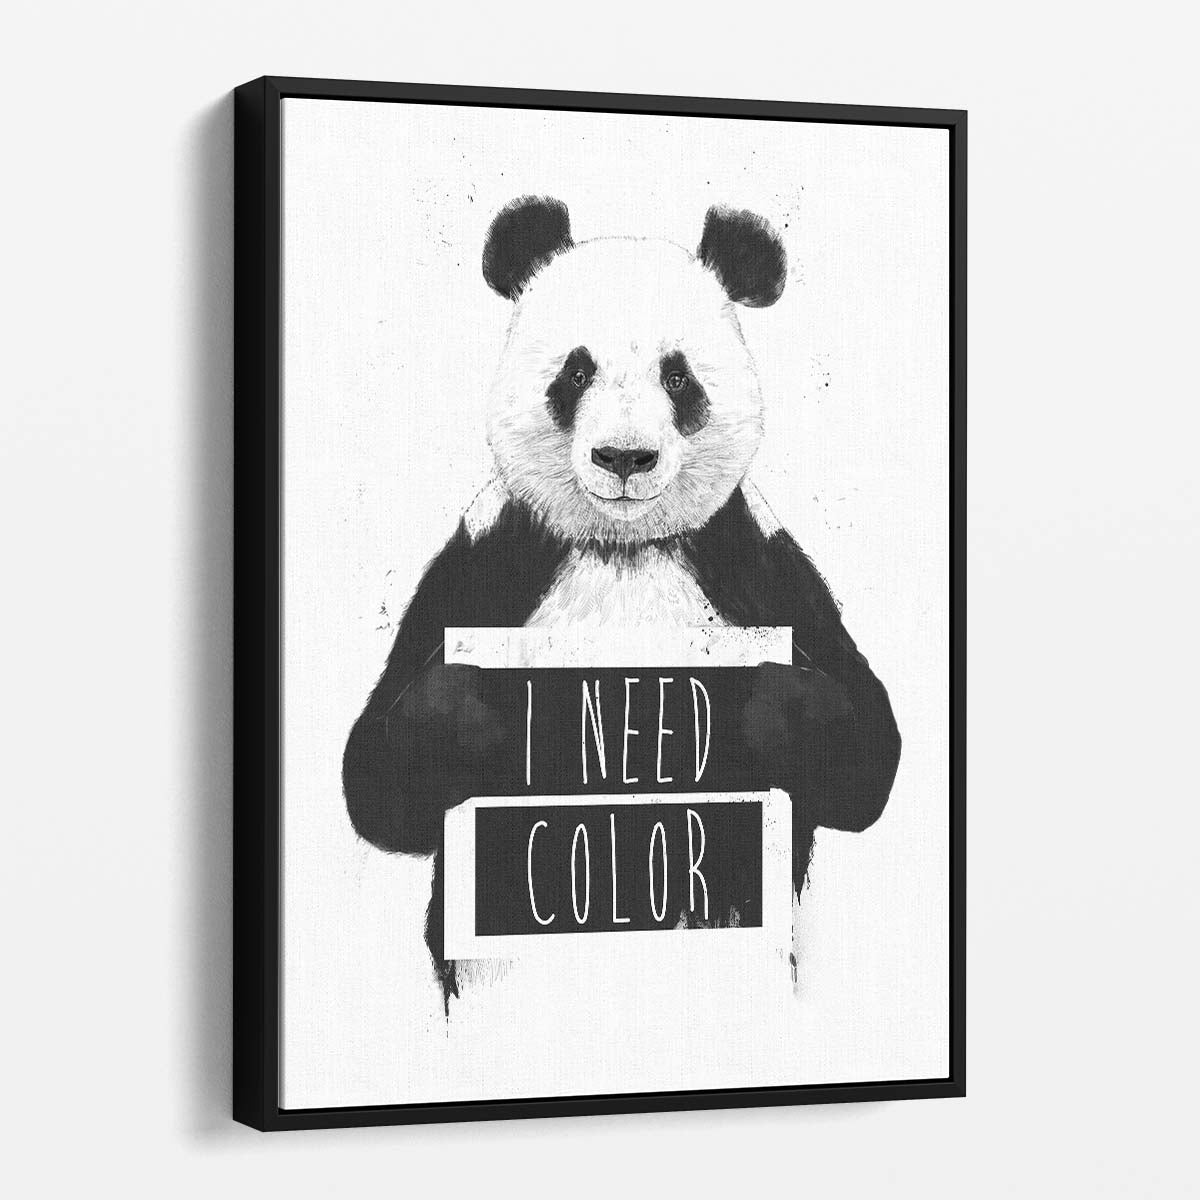 Monochrome Panda Graffiti Illustration for Nursery with Motivational Quote by Luxuriance Designs, made in USA